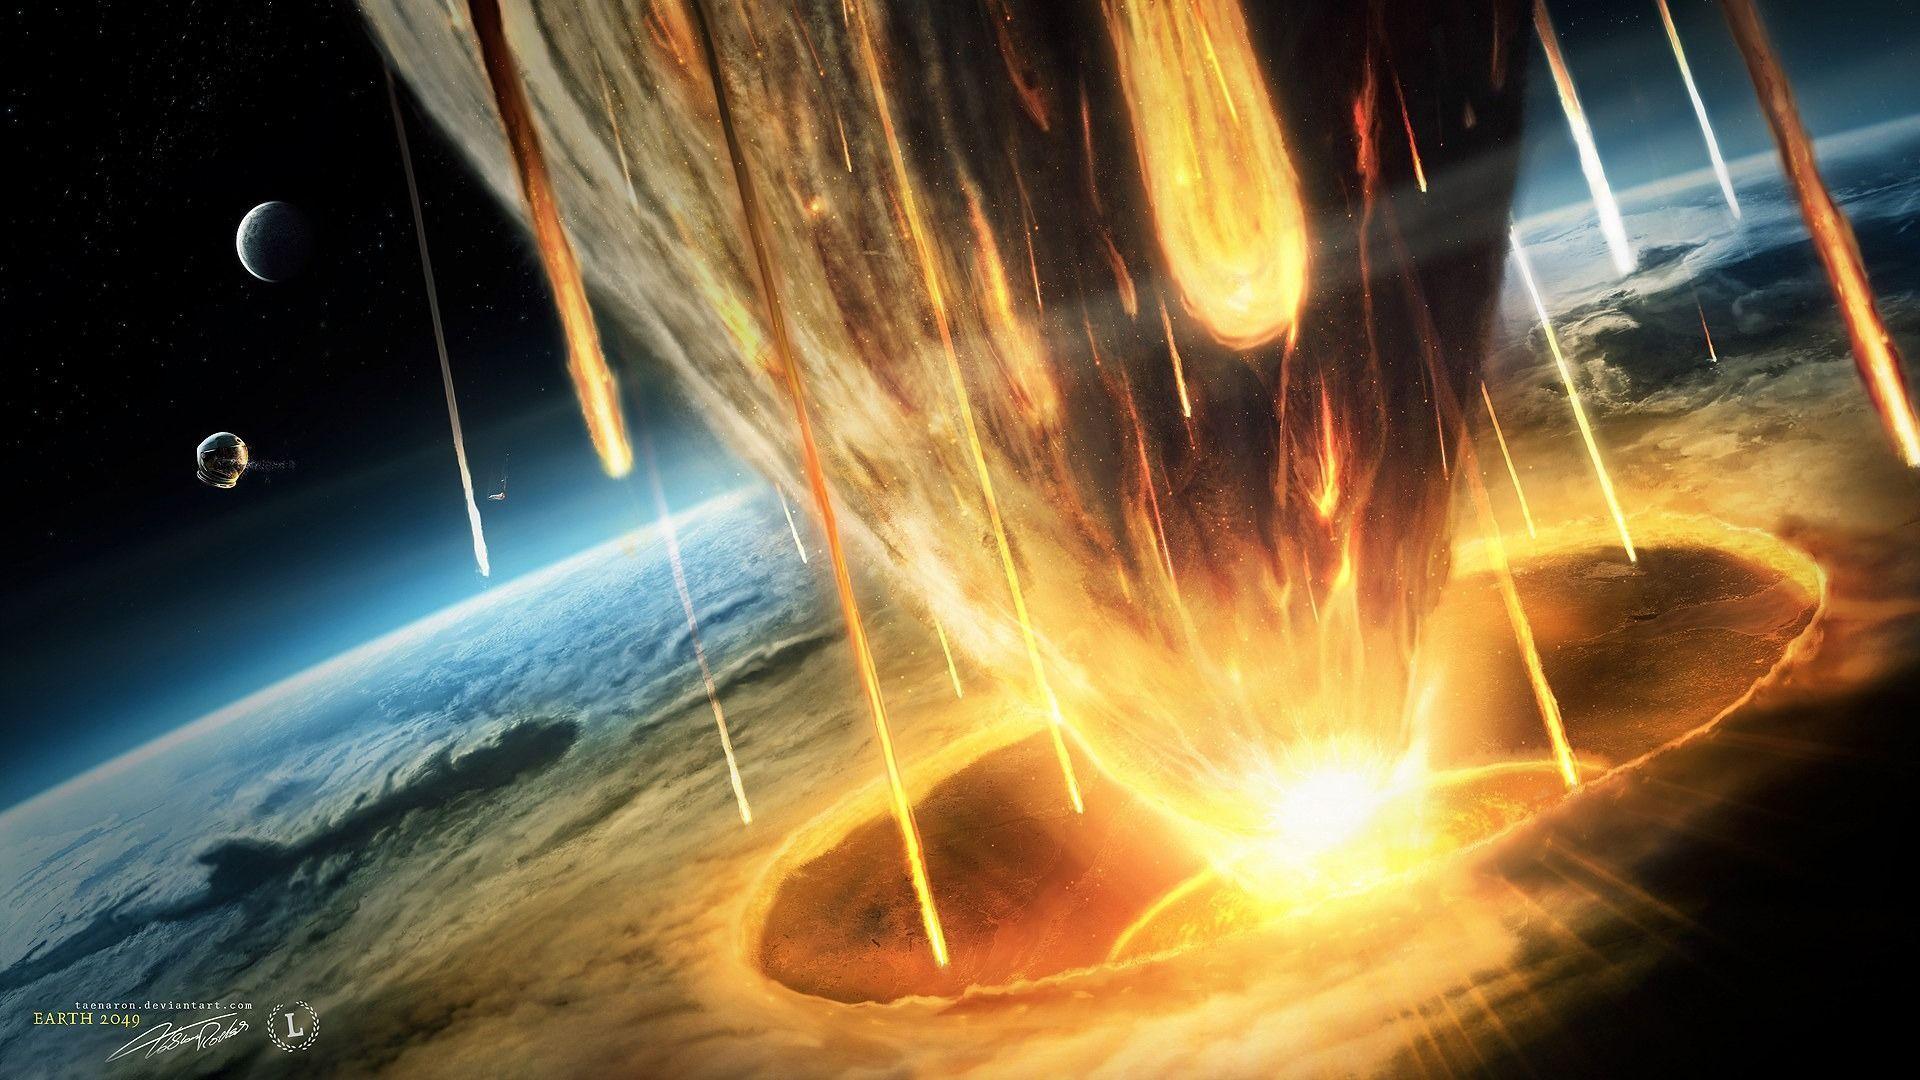 HD Space Art Asteroid Armageddon The End Of The Earth